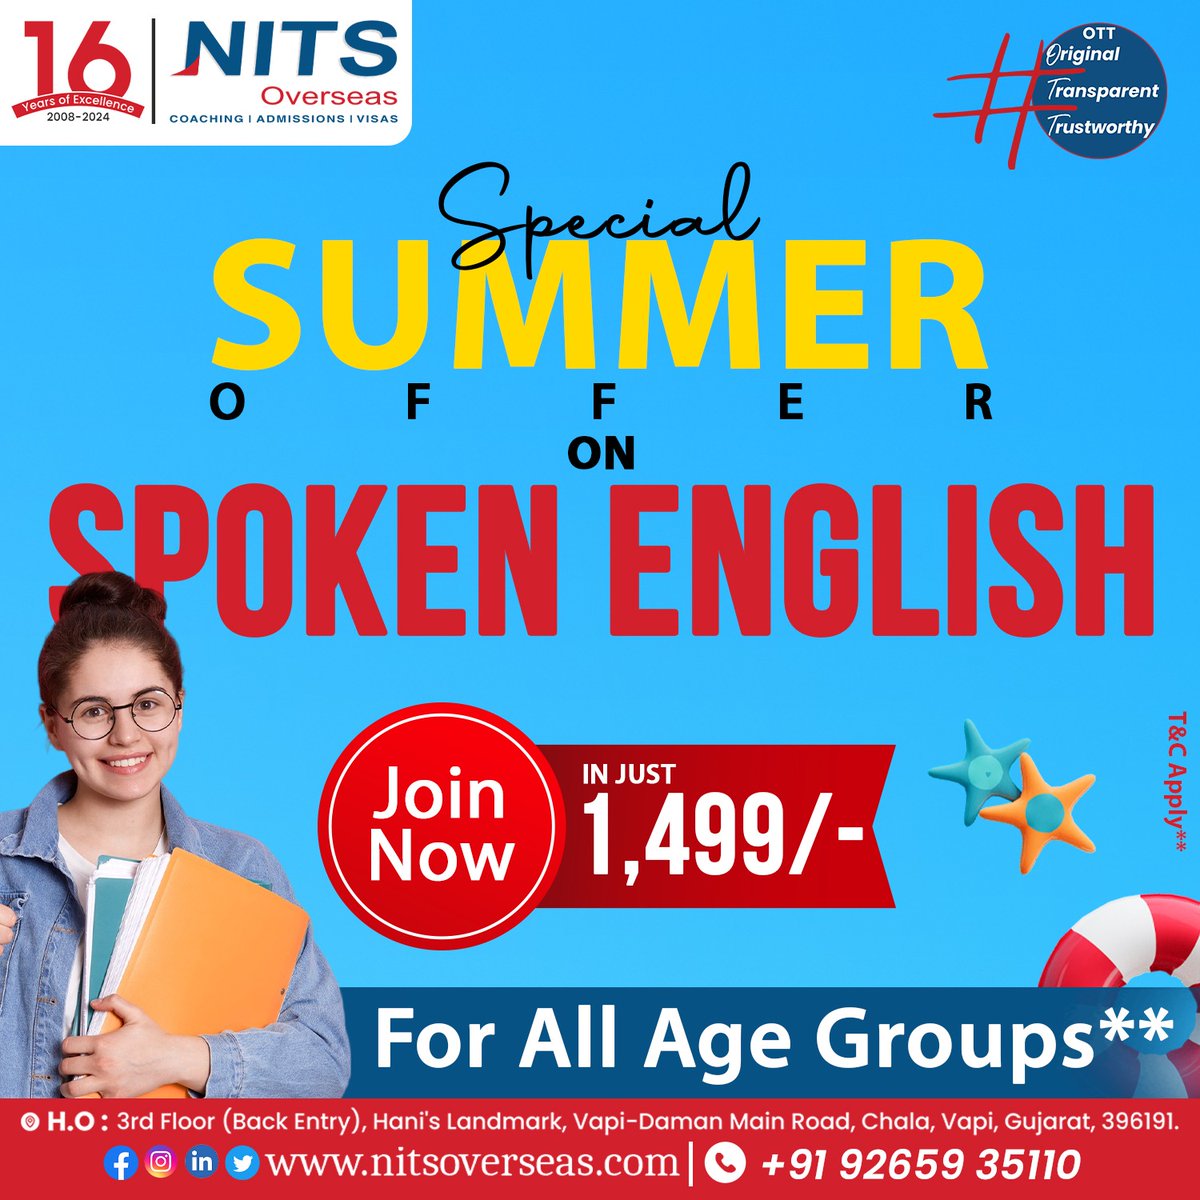 Make this summer your season of fluency! Join our spoken English program for all age groups at an unbeatable price of Rs. 1499/-. Don't miss out, sign up now!

📞: +91 9265935110

#nitsoverseas #studyabroad #education #ielts #study #spokenenglish